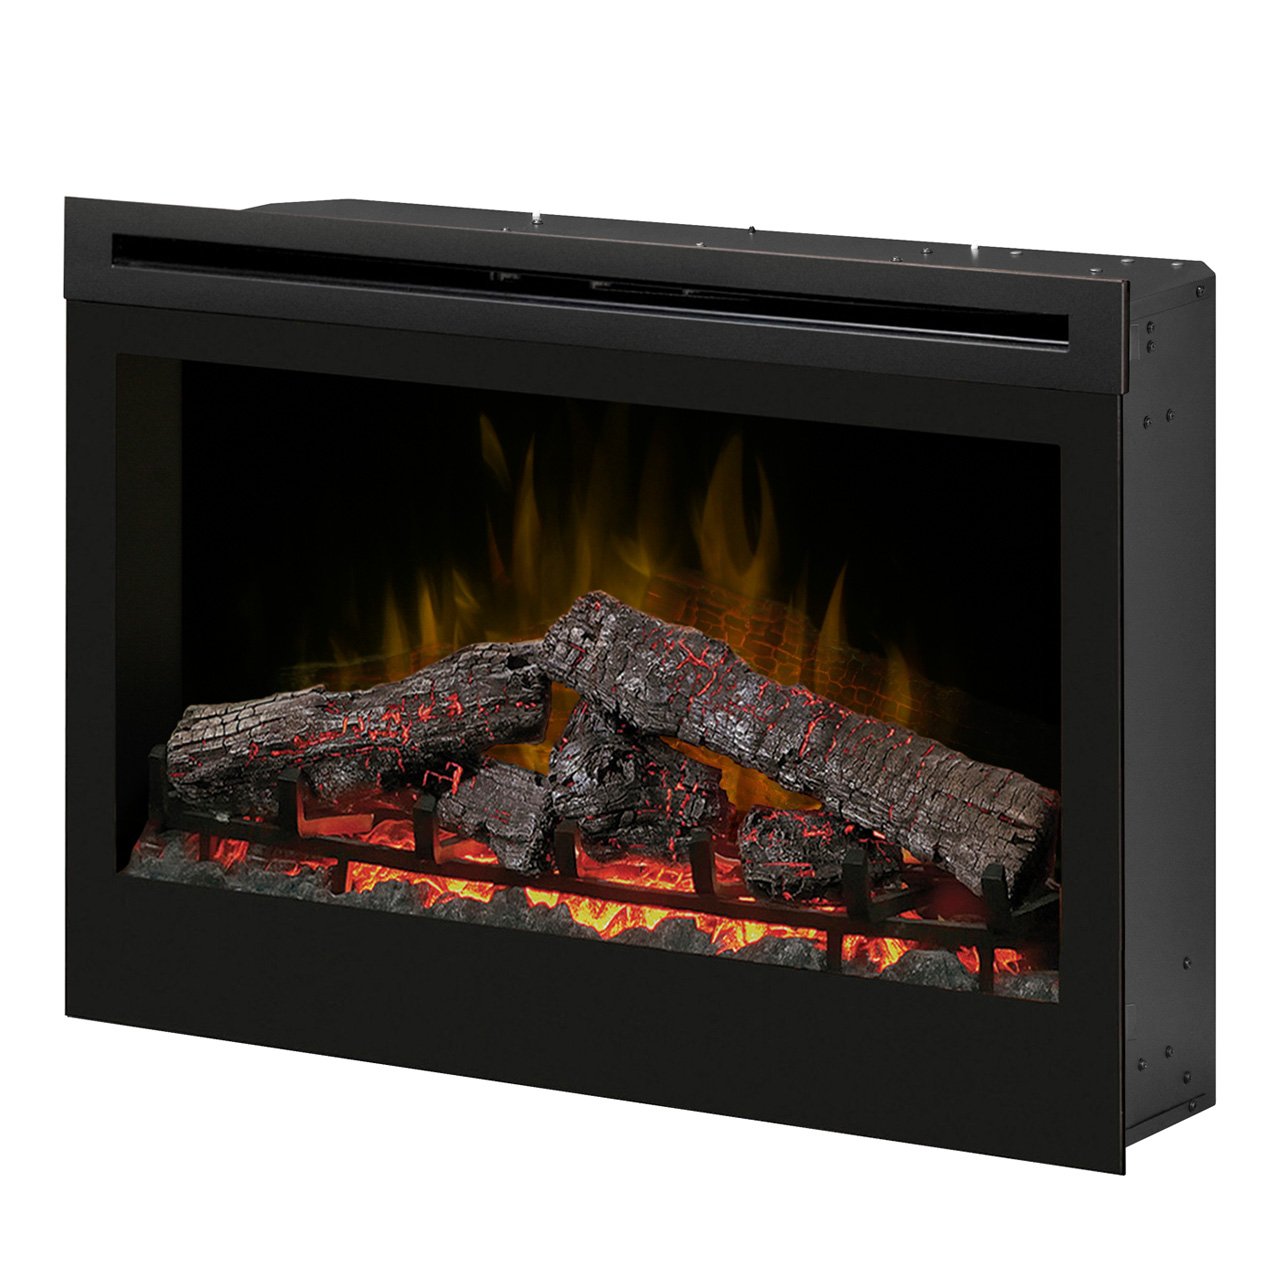 Electric Fireplace with Remote Unique Dimplex Df3033st 33 Inch Self Trimming Electric Fireplace Insert